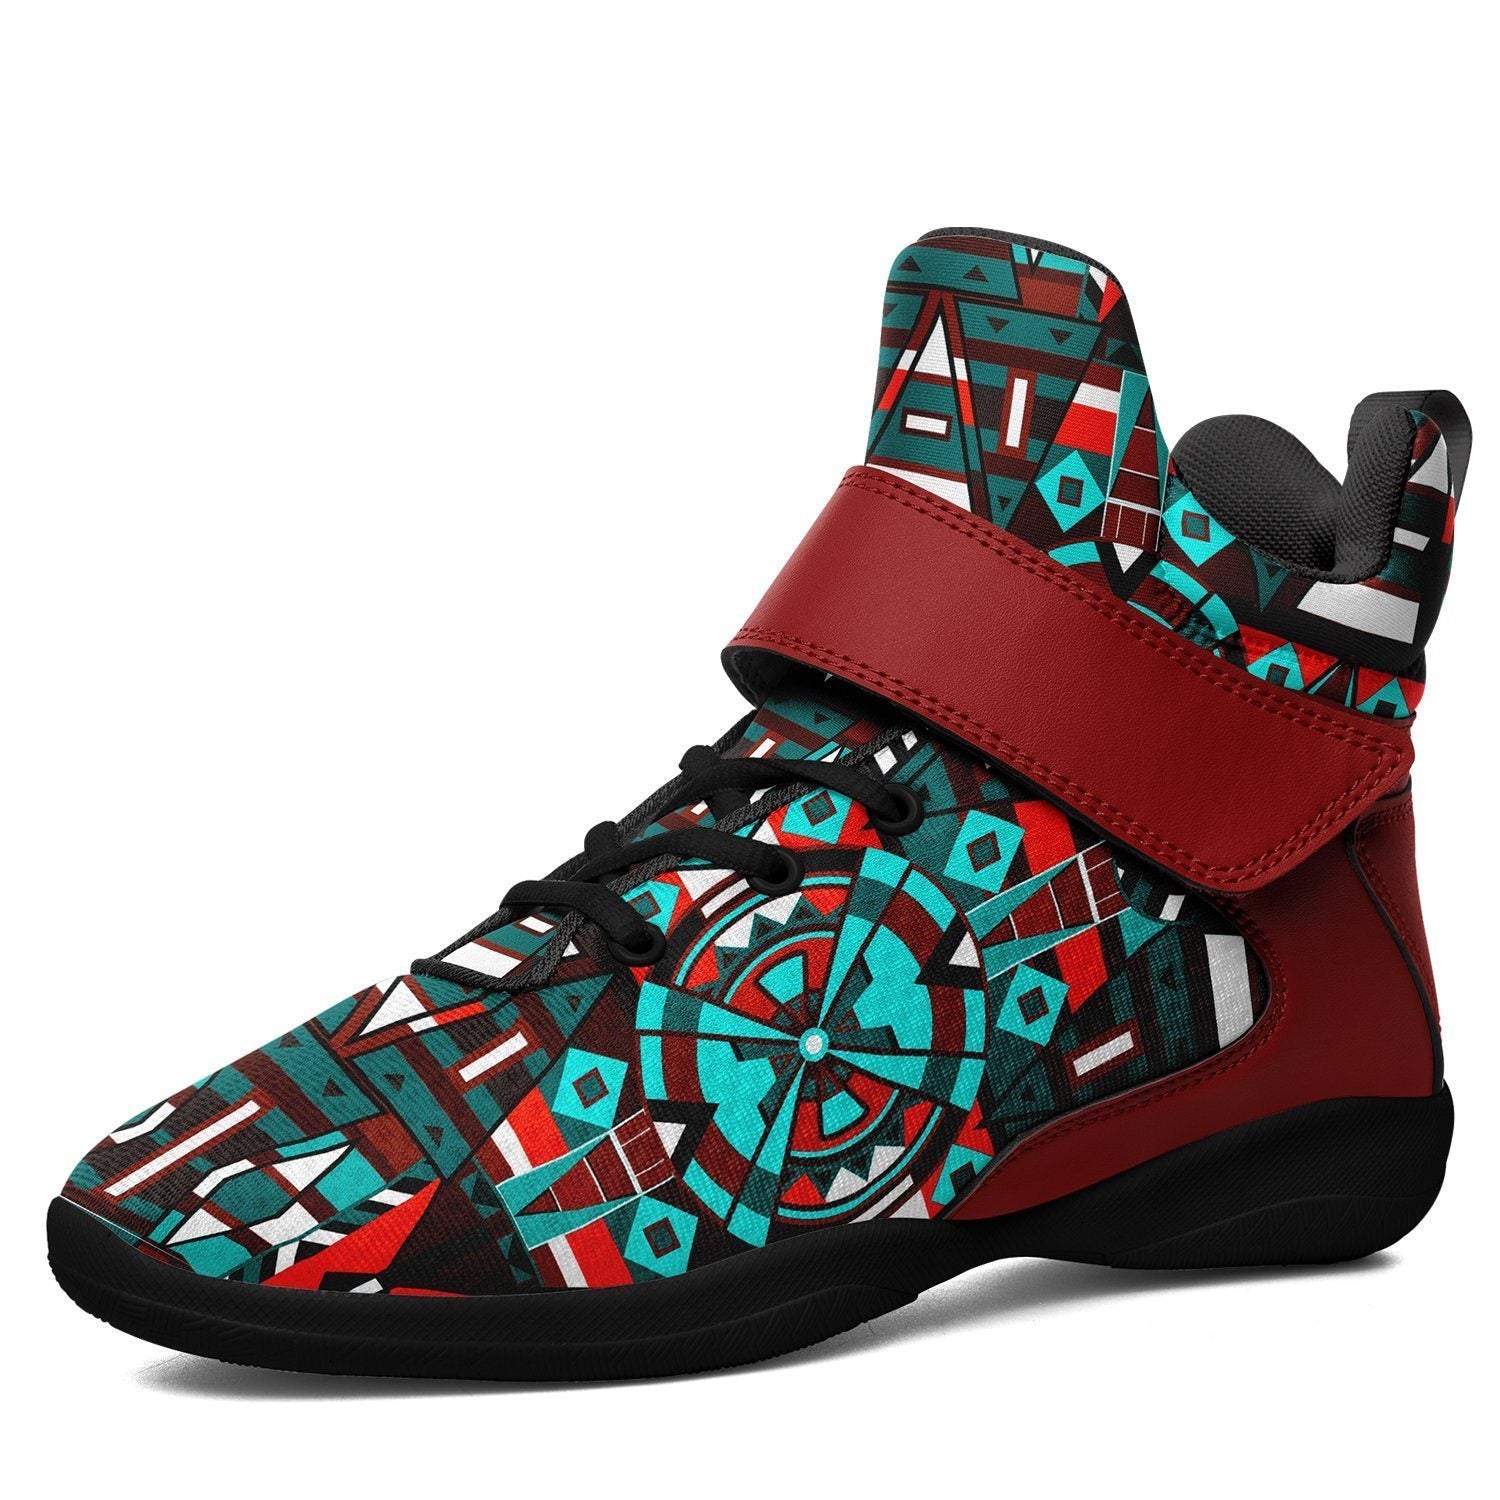 Captive Winter II Kid's Ipottaa Basketball / Sport High Top Shoes 49 Dzine US Child 12.5 / EUR 30 Black Sole with Dark Red Strap 